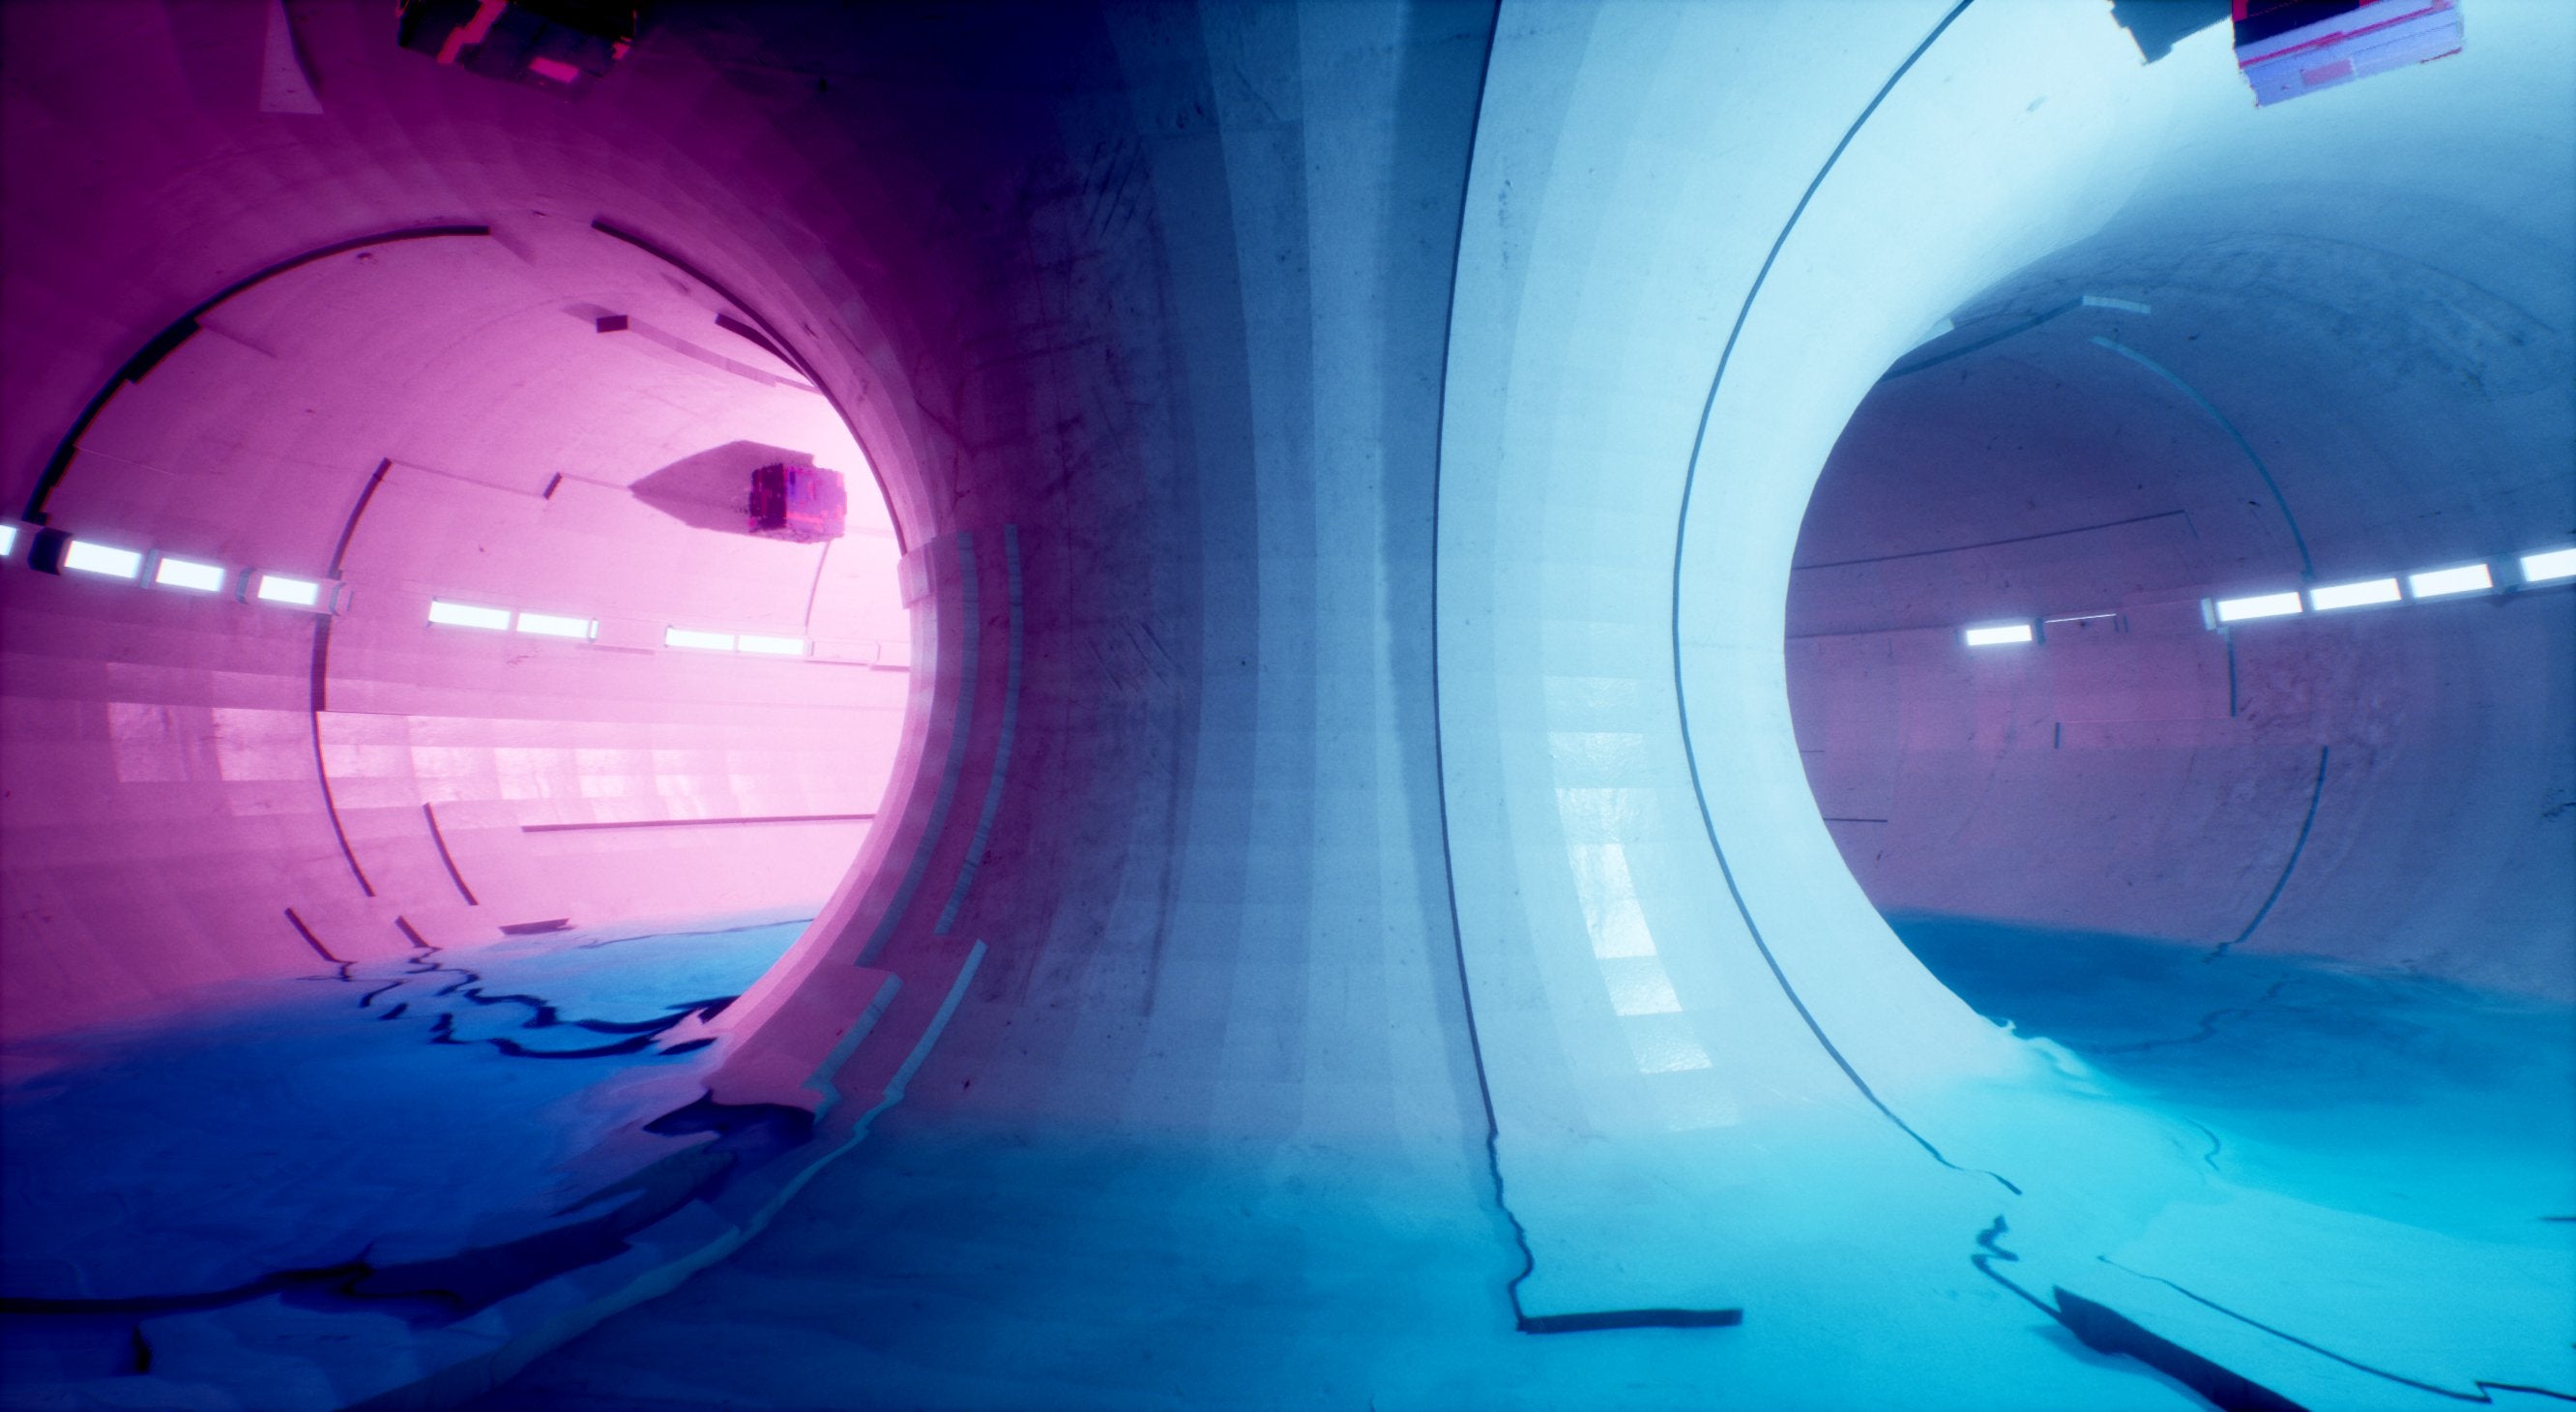 Pink and blue lifting inside a giant torus-shaped power core from Lunar Soil.